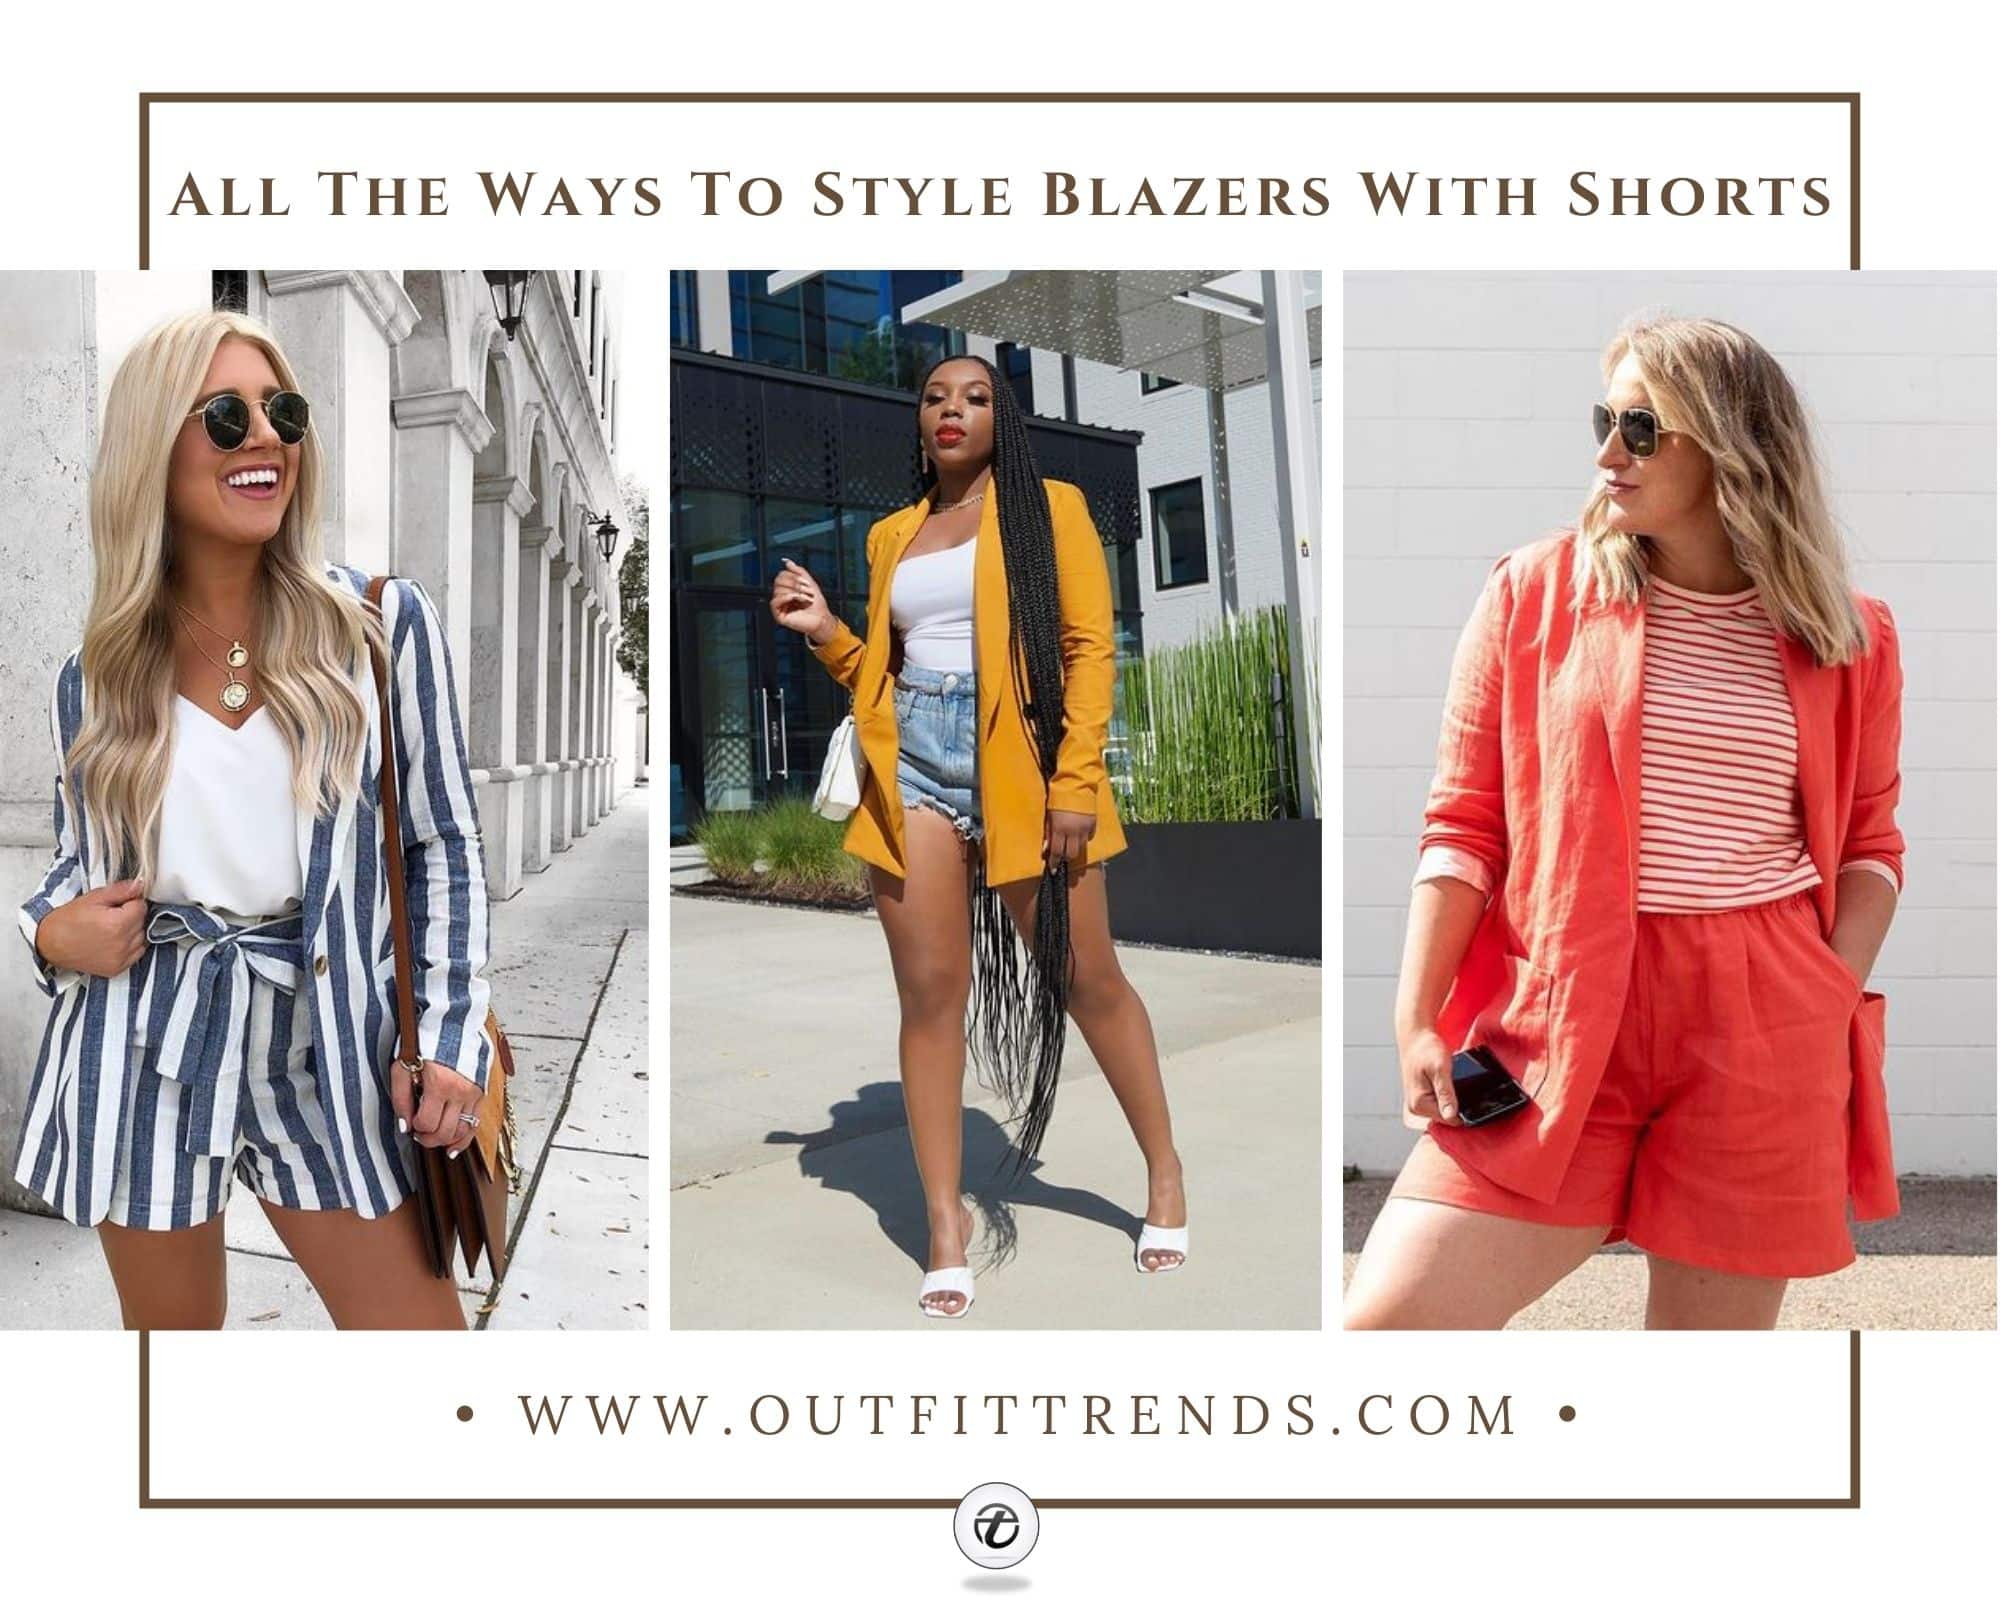 Trendsetting Blazer & Shorts Outfits